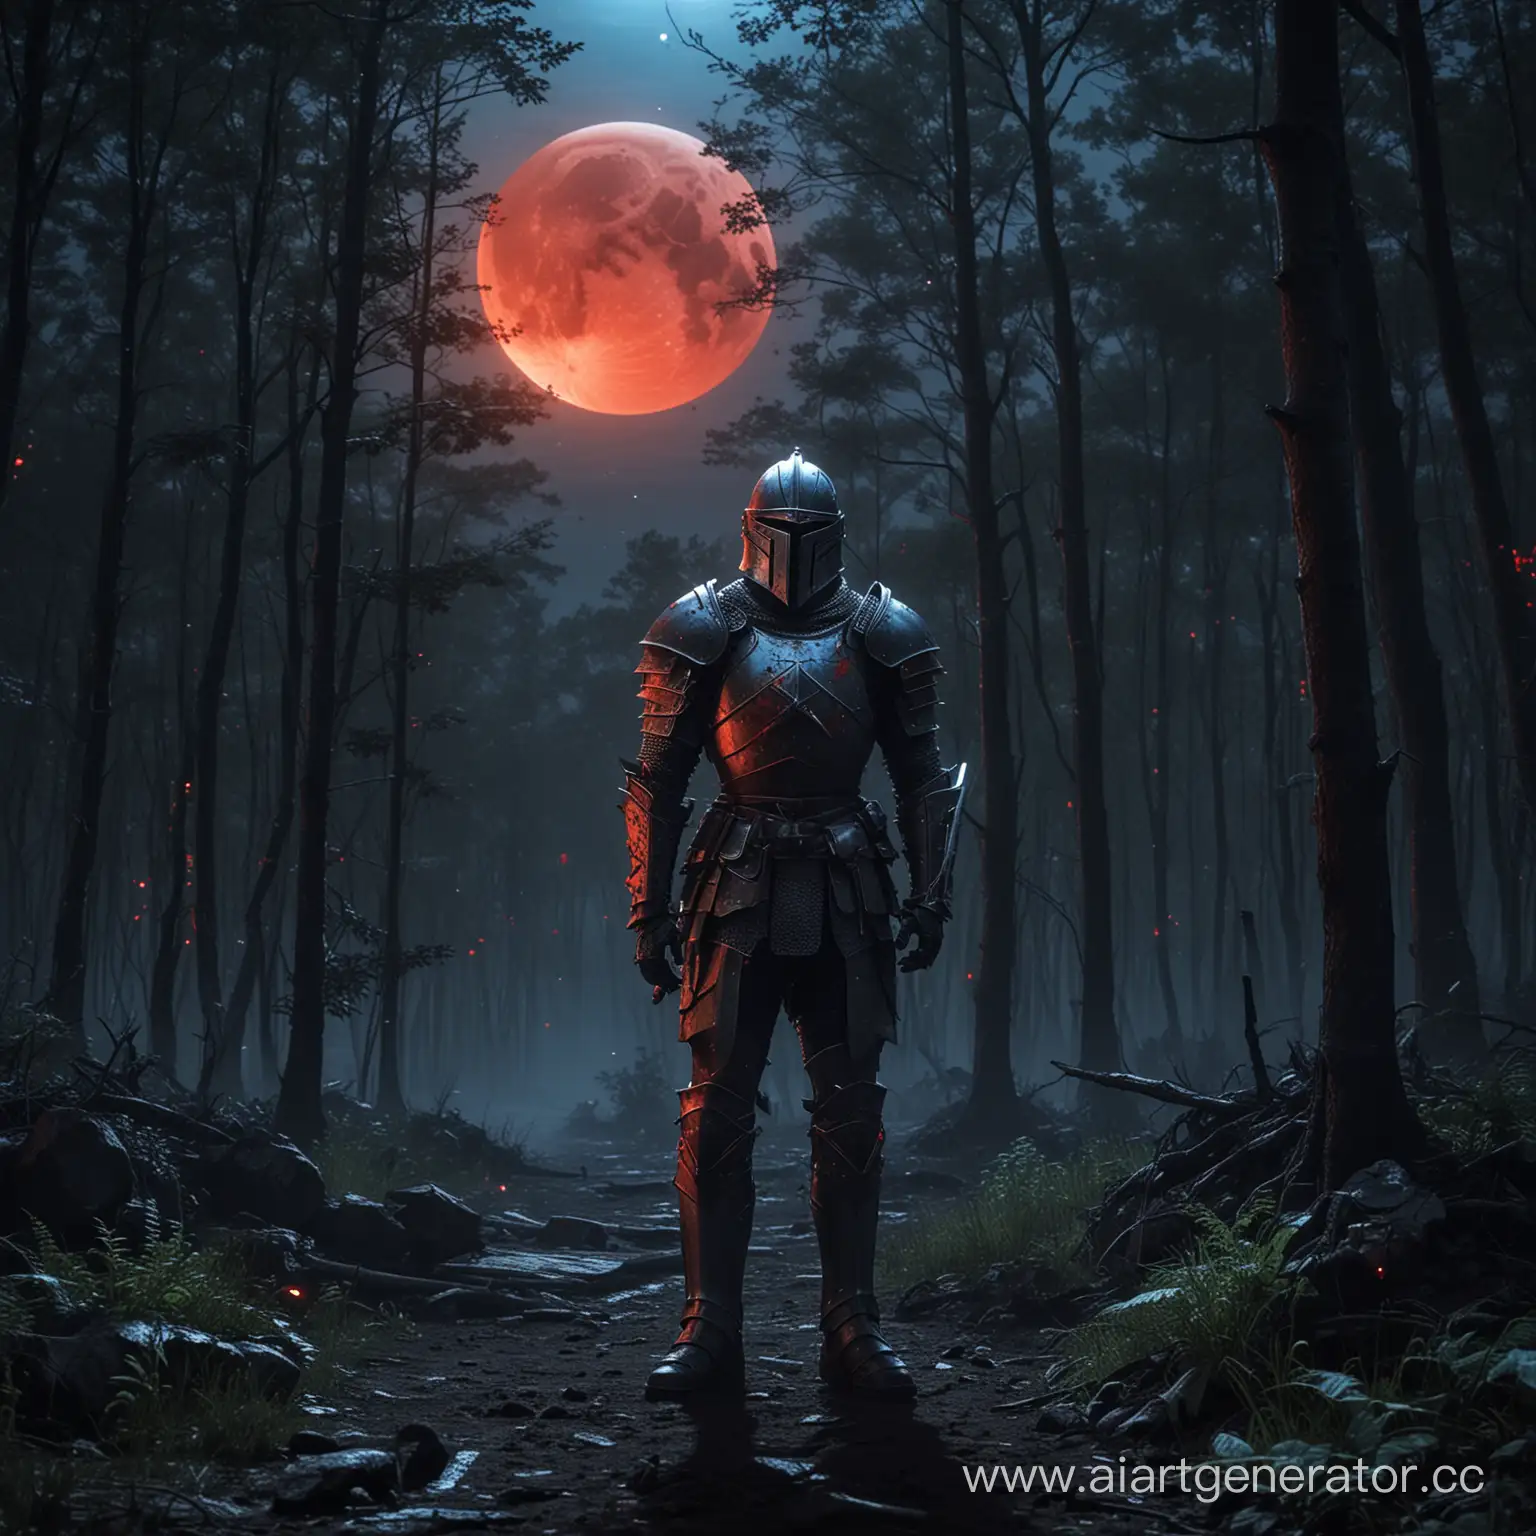 Knight-in-Red-Moonlight-After-Battle